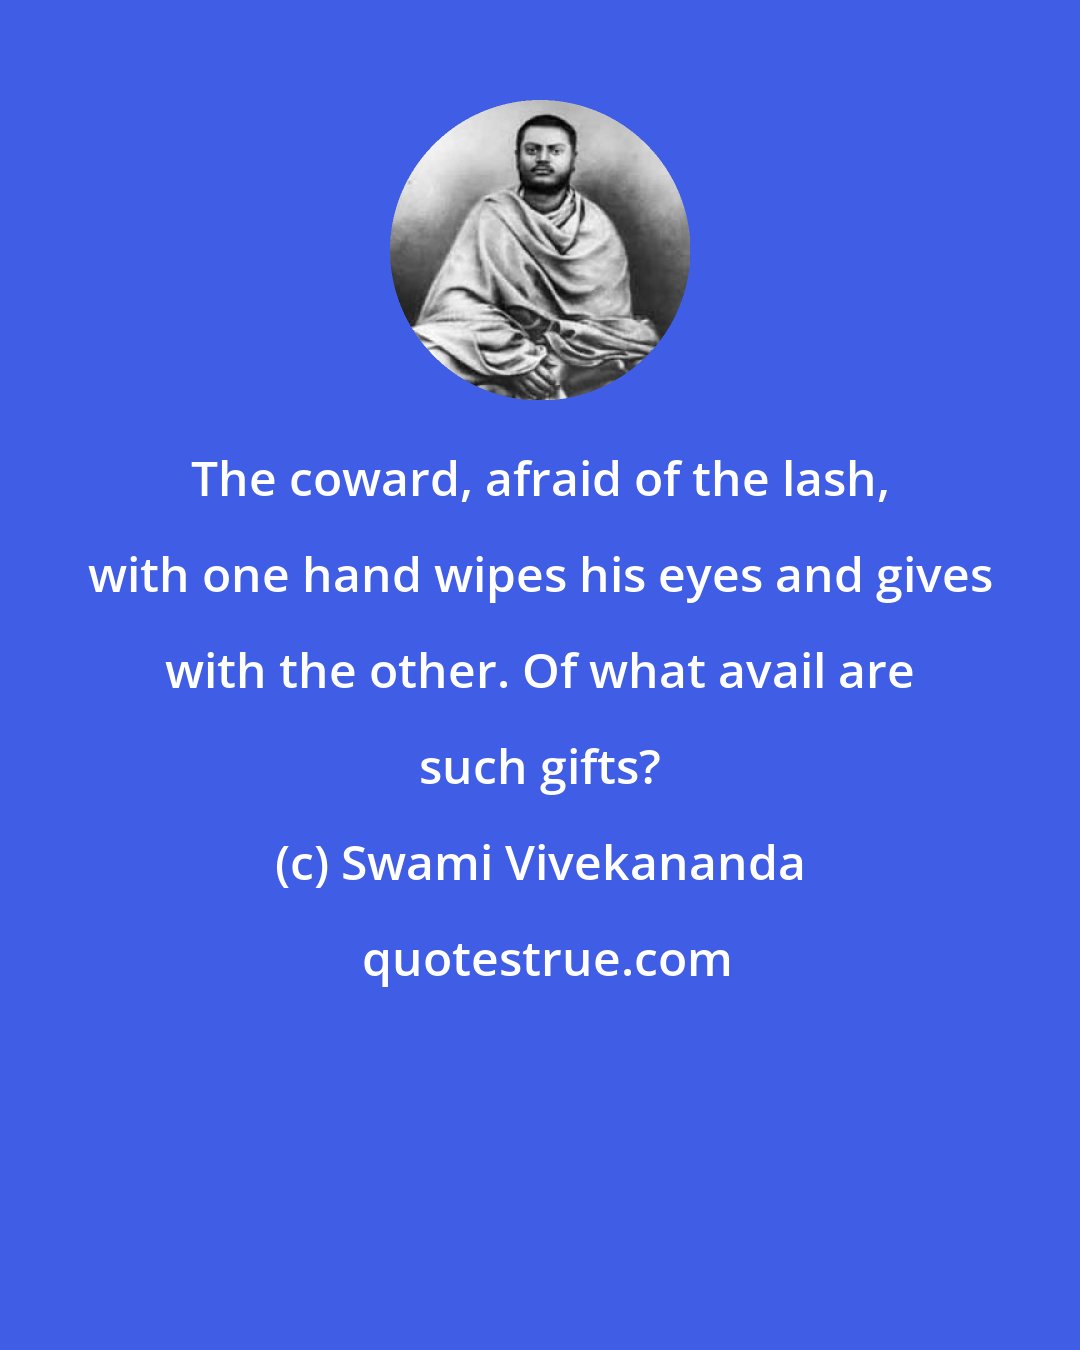 Swami Vivekananda: The coward, afraid of the lash, with one hand wipes his eyes and gives with the other. Of what avail are such gifts?